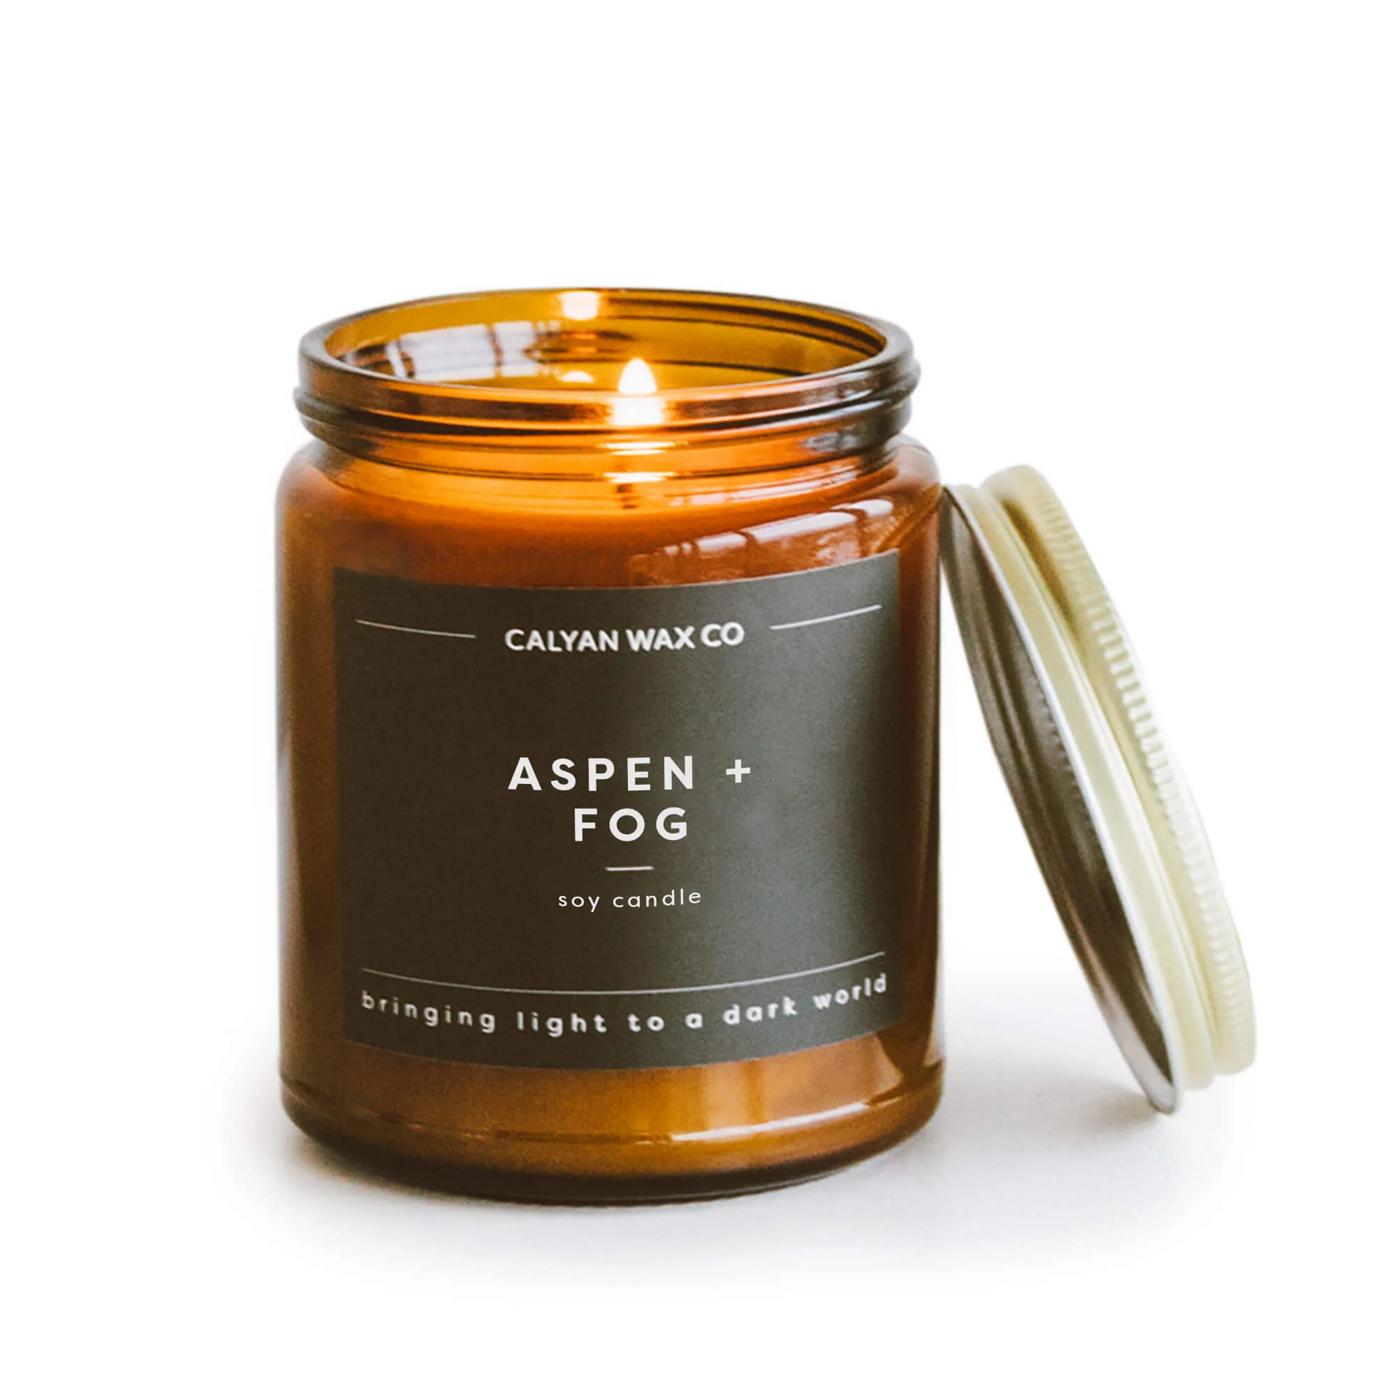 Calyan Wax Co. Aspen + Fog Scented Soy Candle; image 2 of 2